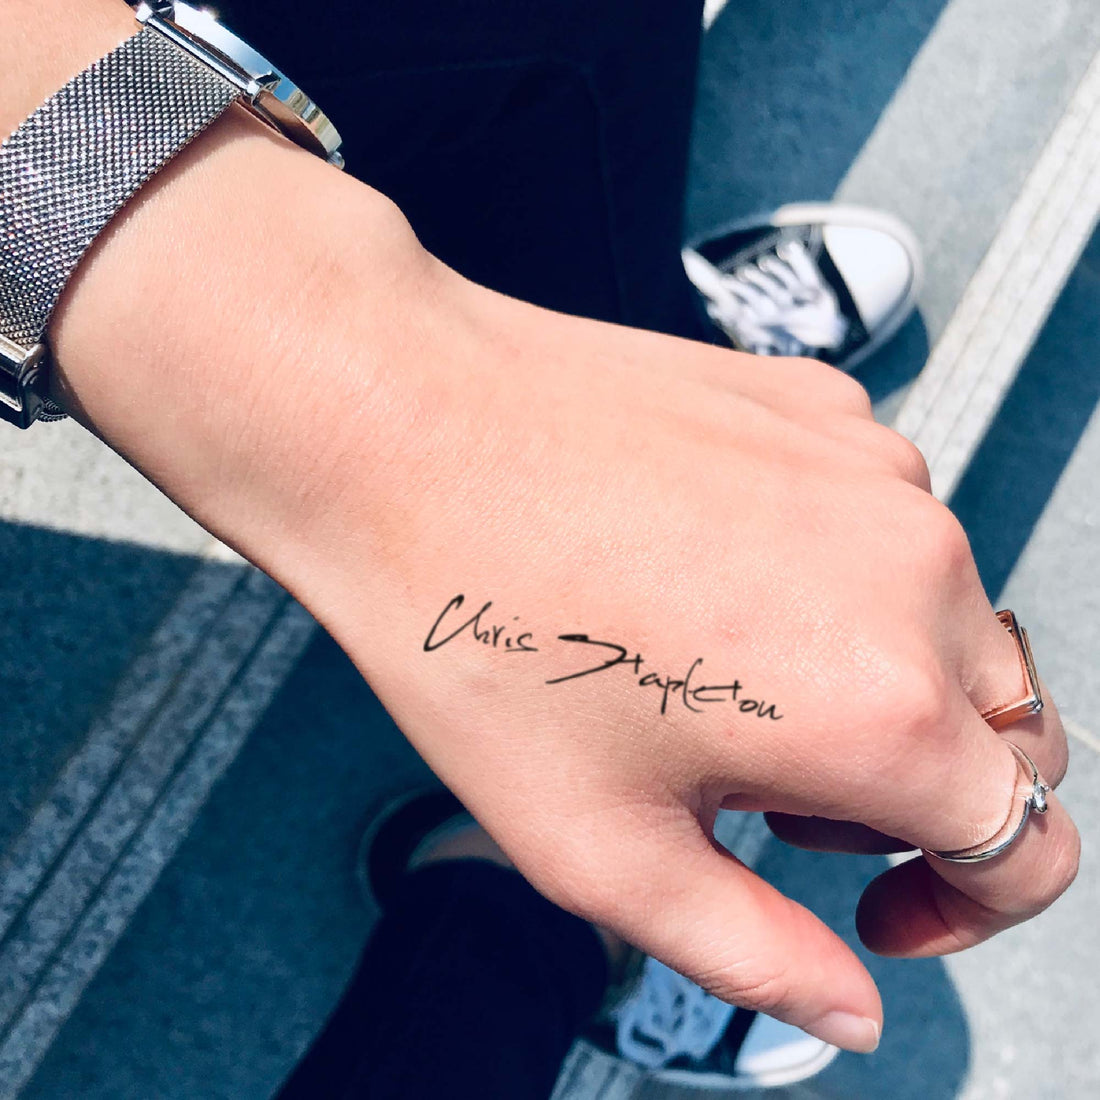 Chris Stapleton custom temporary tattoo sticker design idea inspiration meanings removal arm wrist hand words font name signature calligraphy lyrics tour concert outfits merch accessory gift souvenir costumes wear dress up code